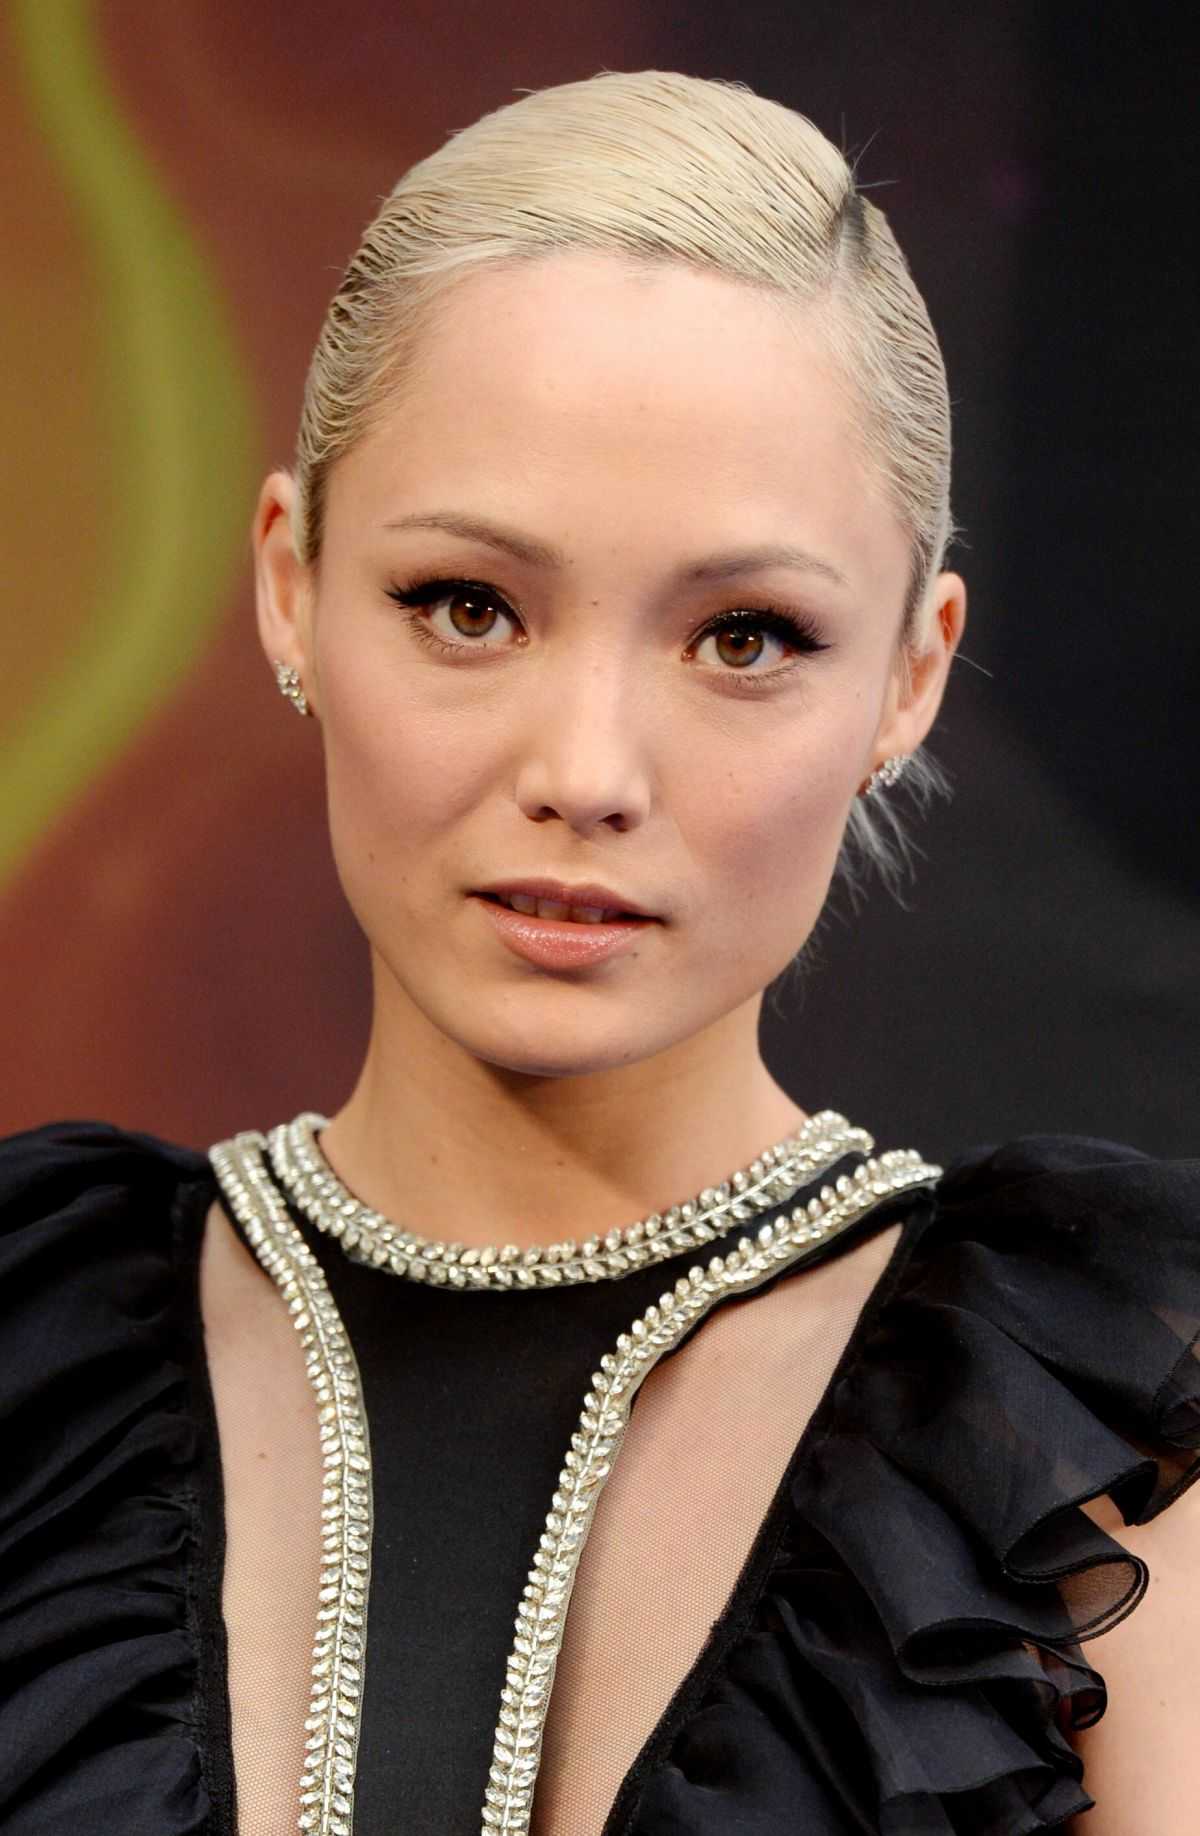 70+ Hot Pictures Of Pom Klementieff Who Plays Mantis In Marvel Cinematic Universe 20